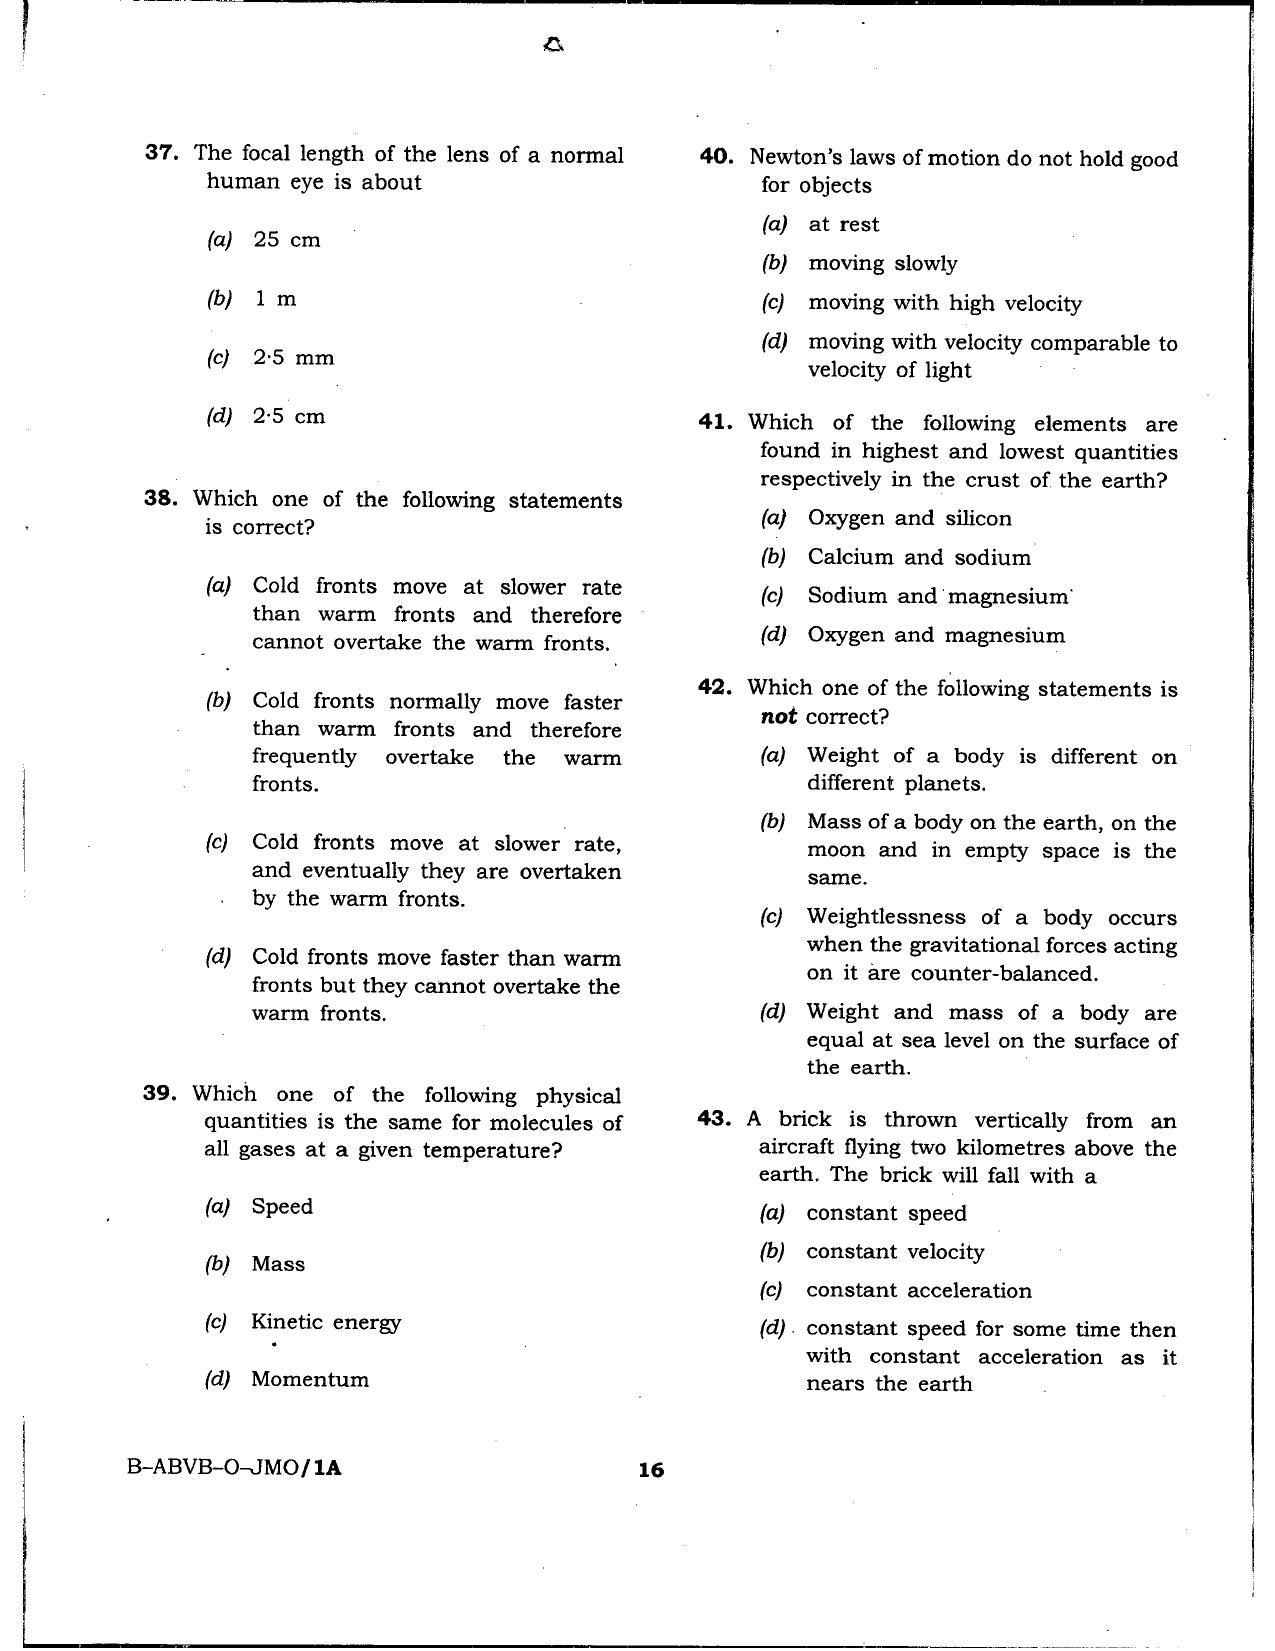 HPSSSB Fitter Model Papers: General Knowledge - Page 16